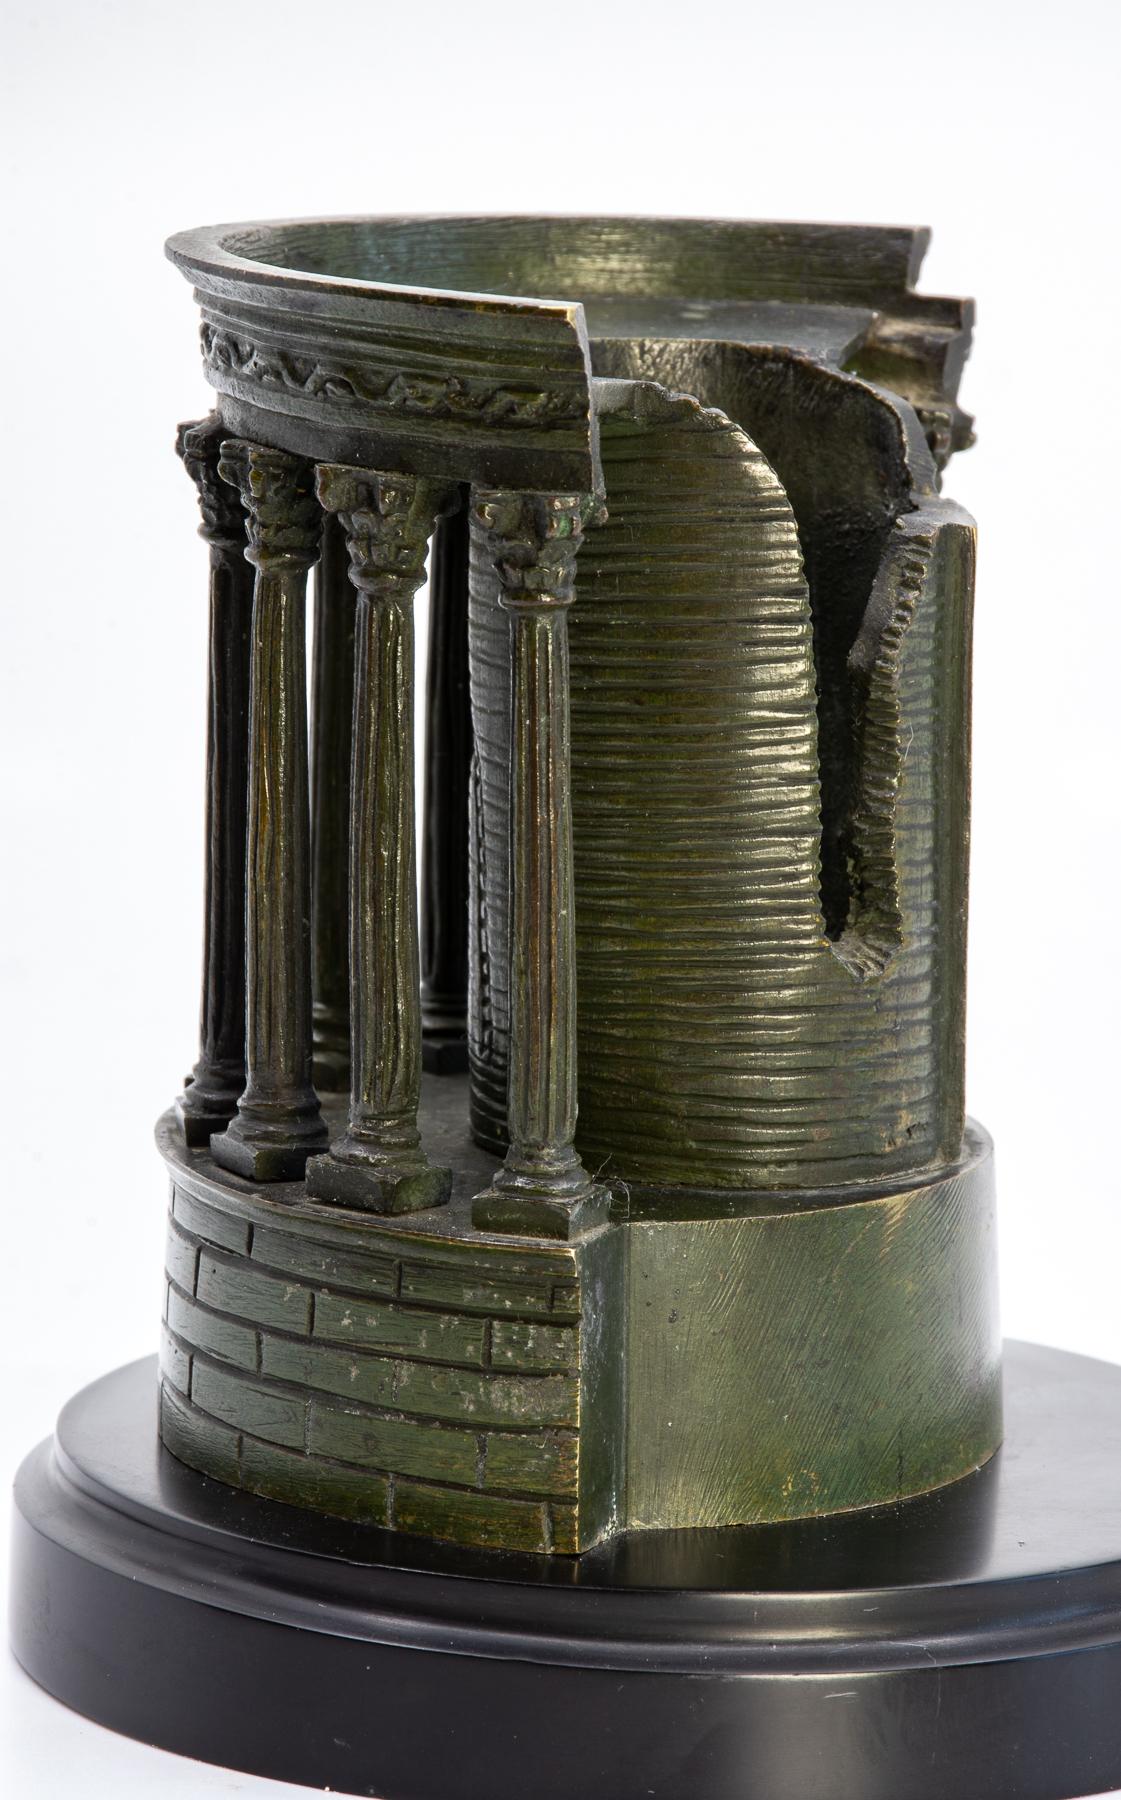 Temple of the Sibyll in Tivoli, circa 1860 bronze Grand Tour model 

The city of Tivoli, near Rome, was one of the prime sites for Grand Tourists. Though famed for Hadrian's Villa and the Villa d'Este, Tivoli's most sought after souvenir was a